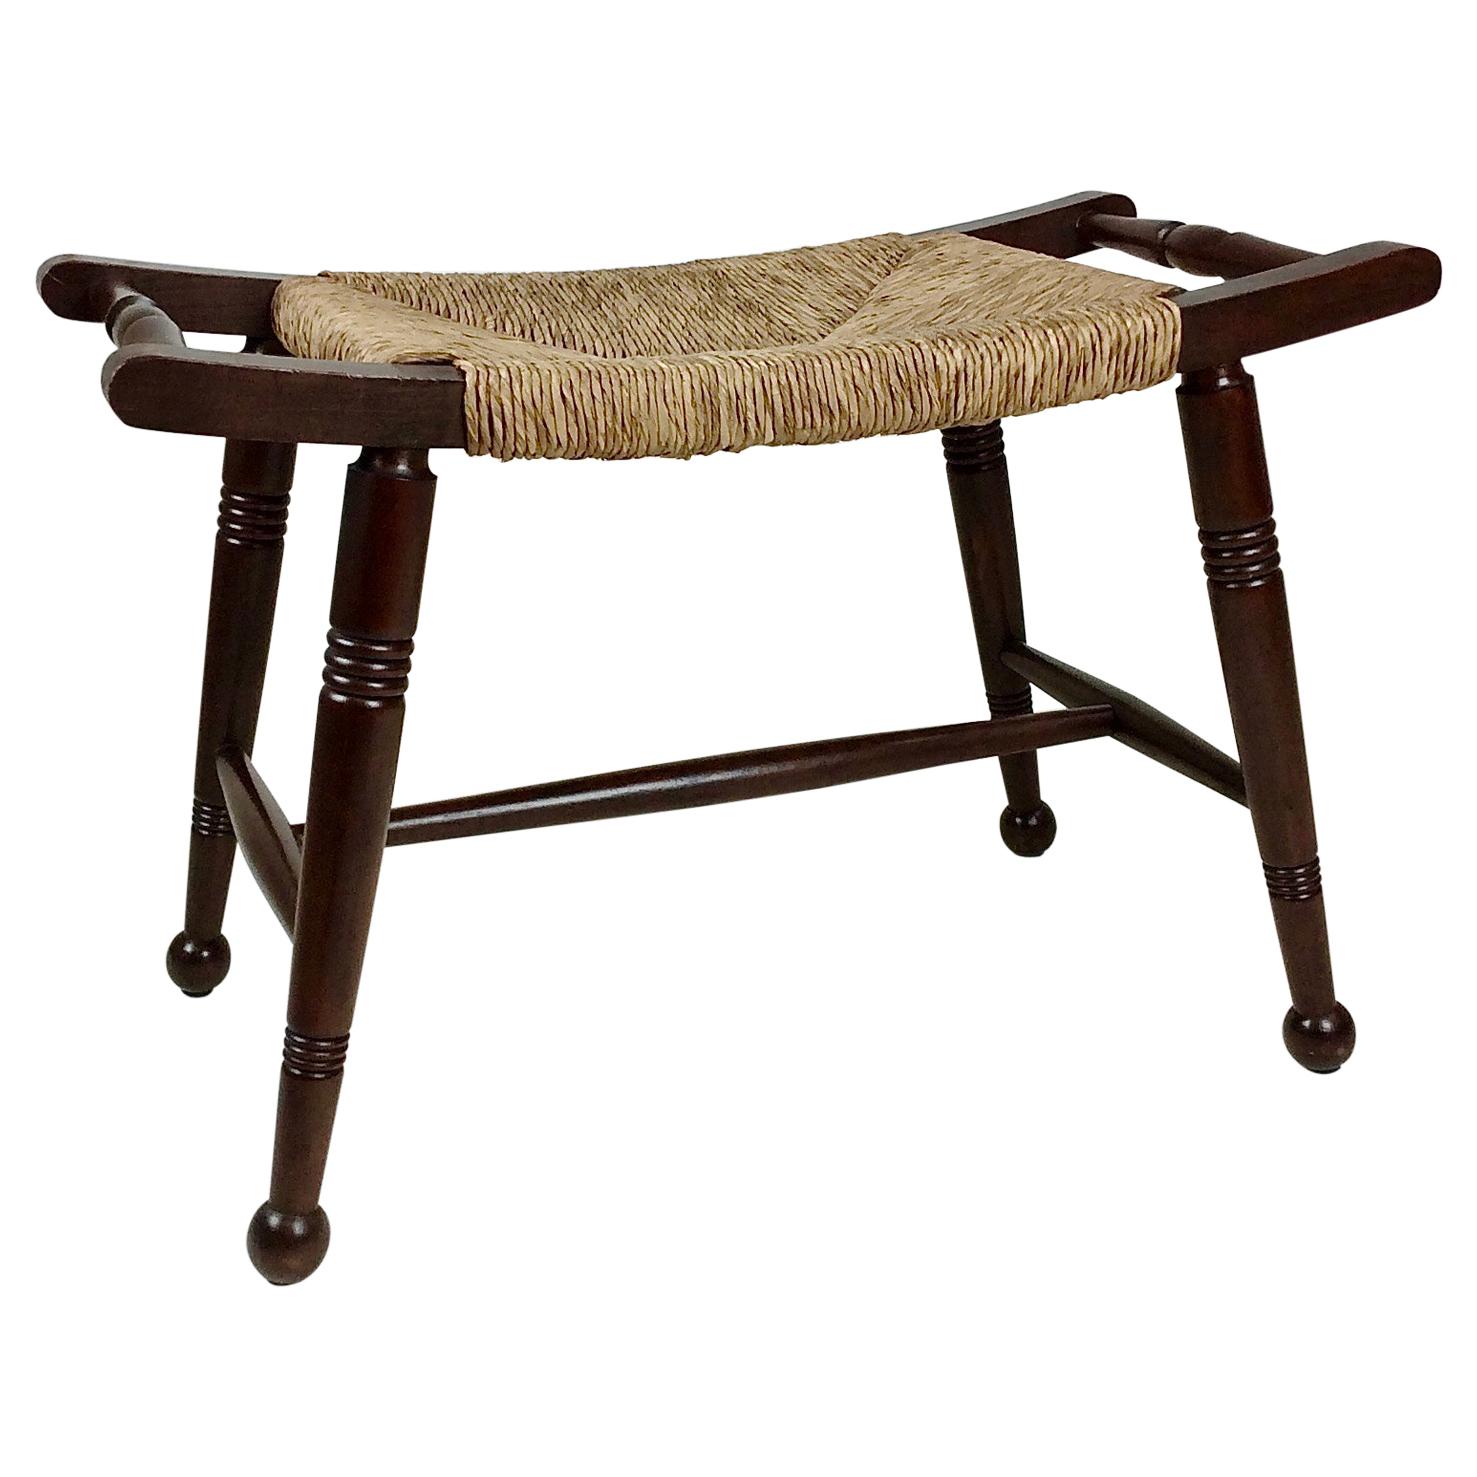 Elegant early 20th century stool, United Kingdom.
Dark turned wood, straw seat.
Good original condition.
Dimensions: 68 cm W, 37 cm D, 46 cm H, seat height: 43 cm.
All purchases are covered by our Buyer Protection Guarantee.
This item can be